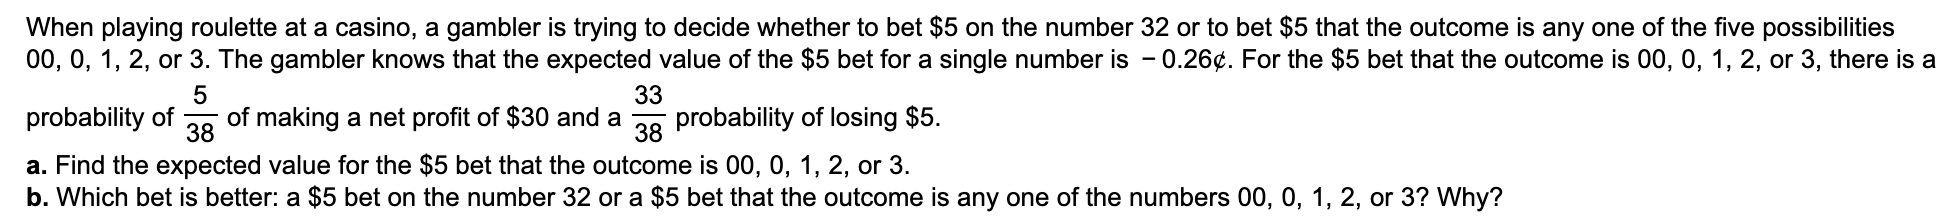 When playing roulette at a casino, a gambler is trying to decide whether to bet $5 on the number 32 or to bet $5 that the outcome is any one of the five possibilities
00, 0, 1, 2, or 3. The gambler knows that the expected value of the $5 bet for a single number is - 0.26¢. For the $5 bet that the outcome is 00, 0, 1, 2, or 3, there is a
5
33
probability of losing $5
of making a net profit of $30 and a
38
probability of
38
a. Find the expected value for the $5 bet that the outcome is 00, 0, 1, 2, or 3.
b. Which bet is better: a $5 bet on the number 32 or a $5 bet that the outcome is any one of the numbers 00, 0, 1, 2, or 3? Why?
